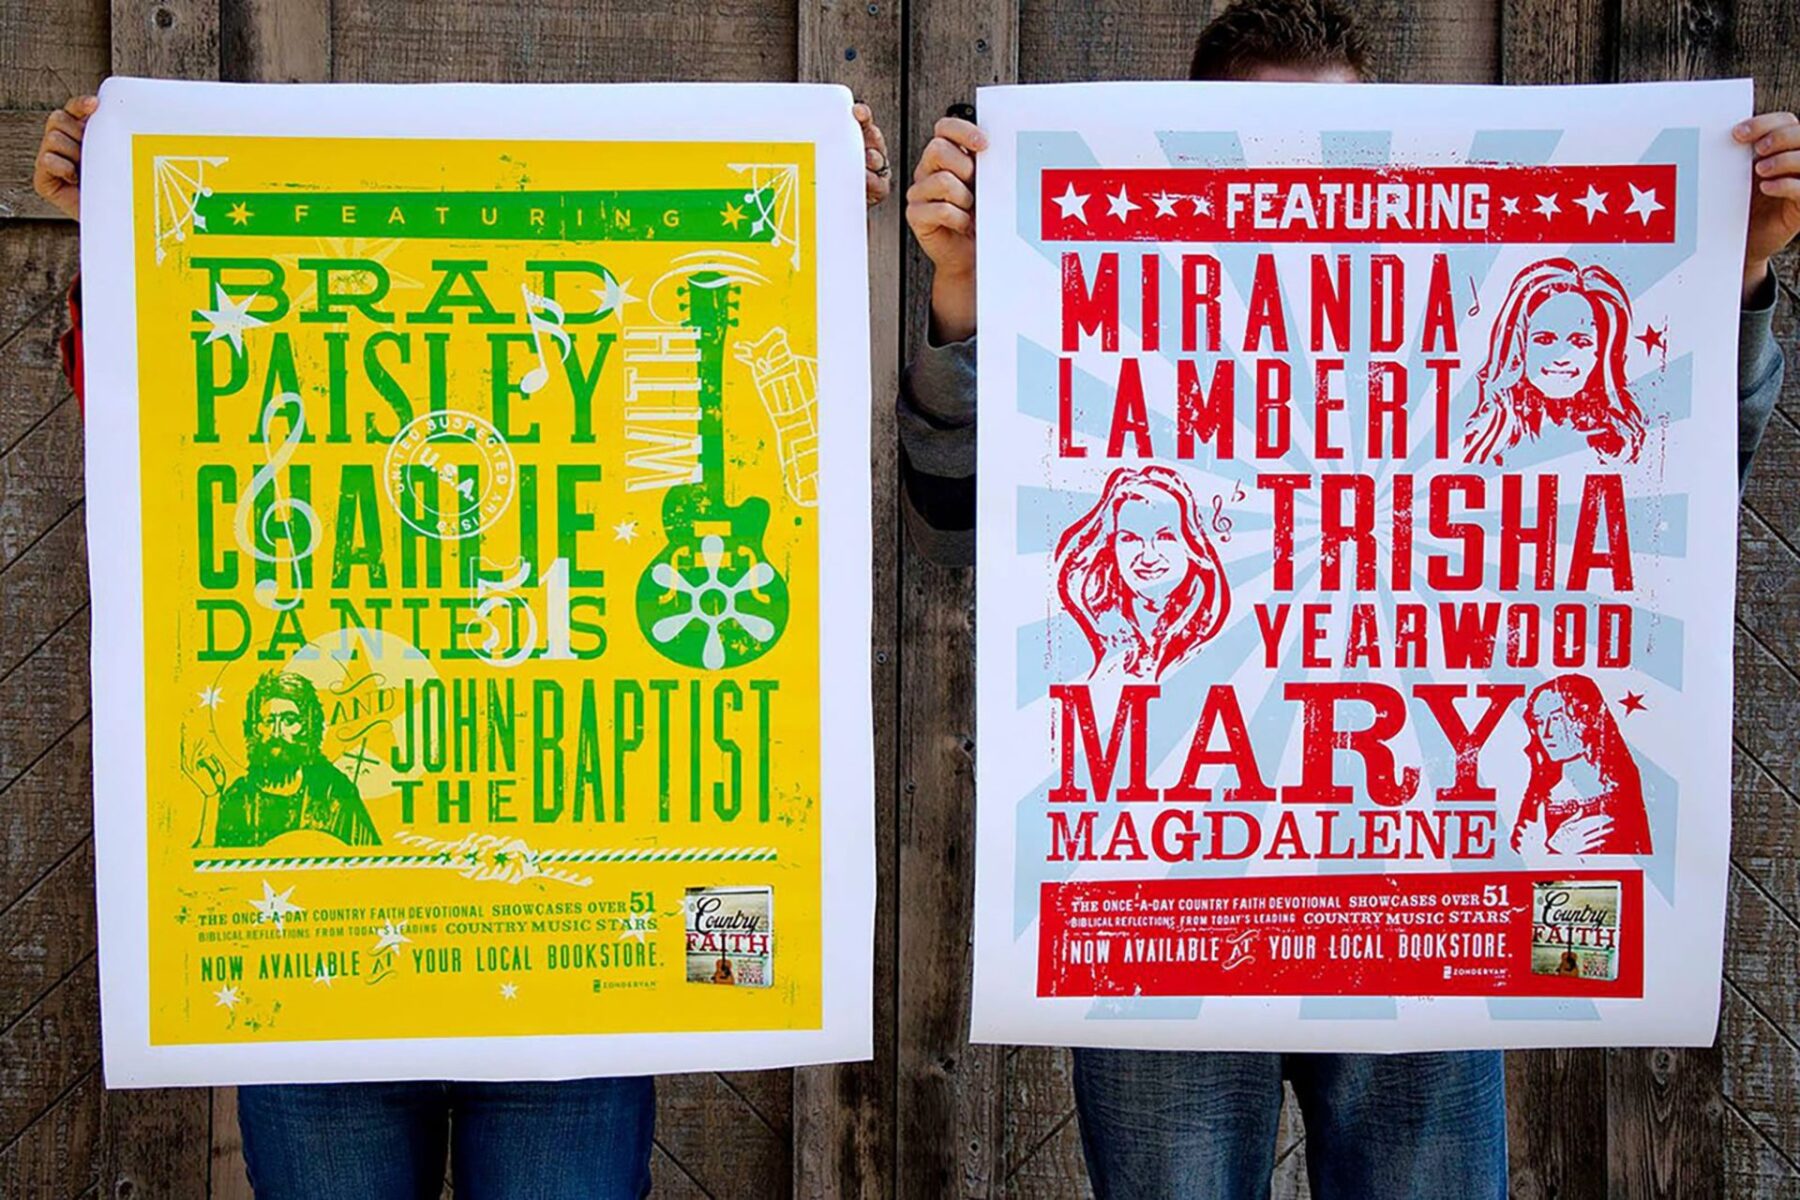 Promotional posters for the book "Country Faith"